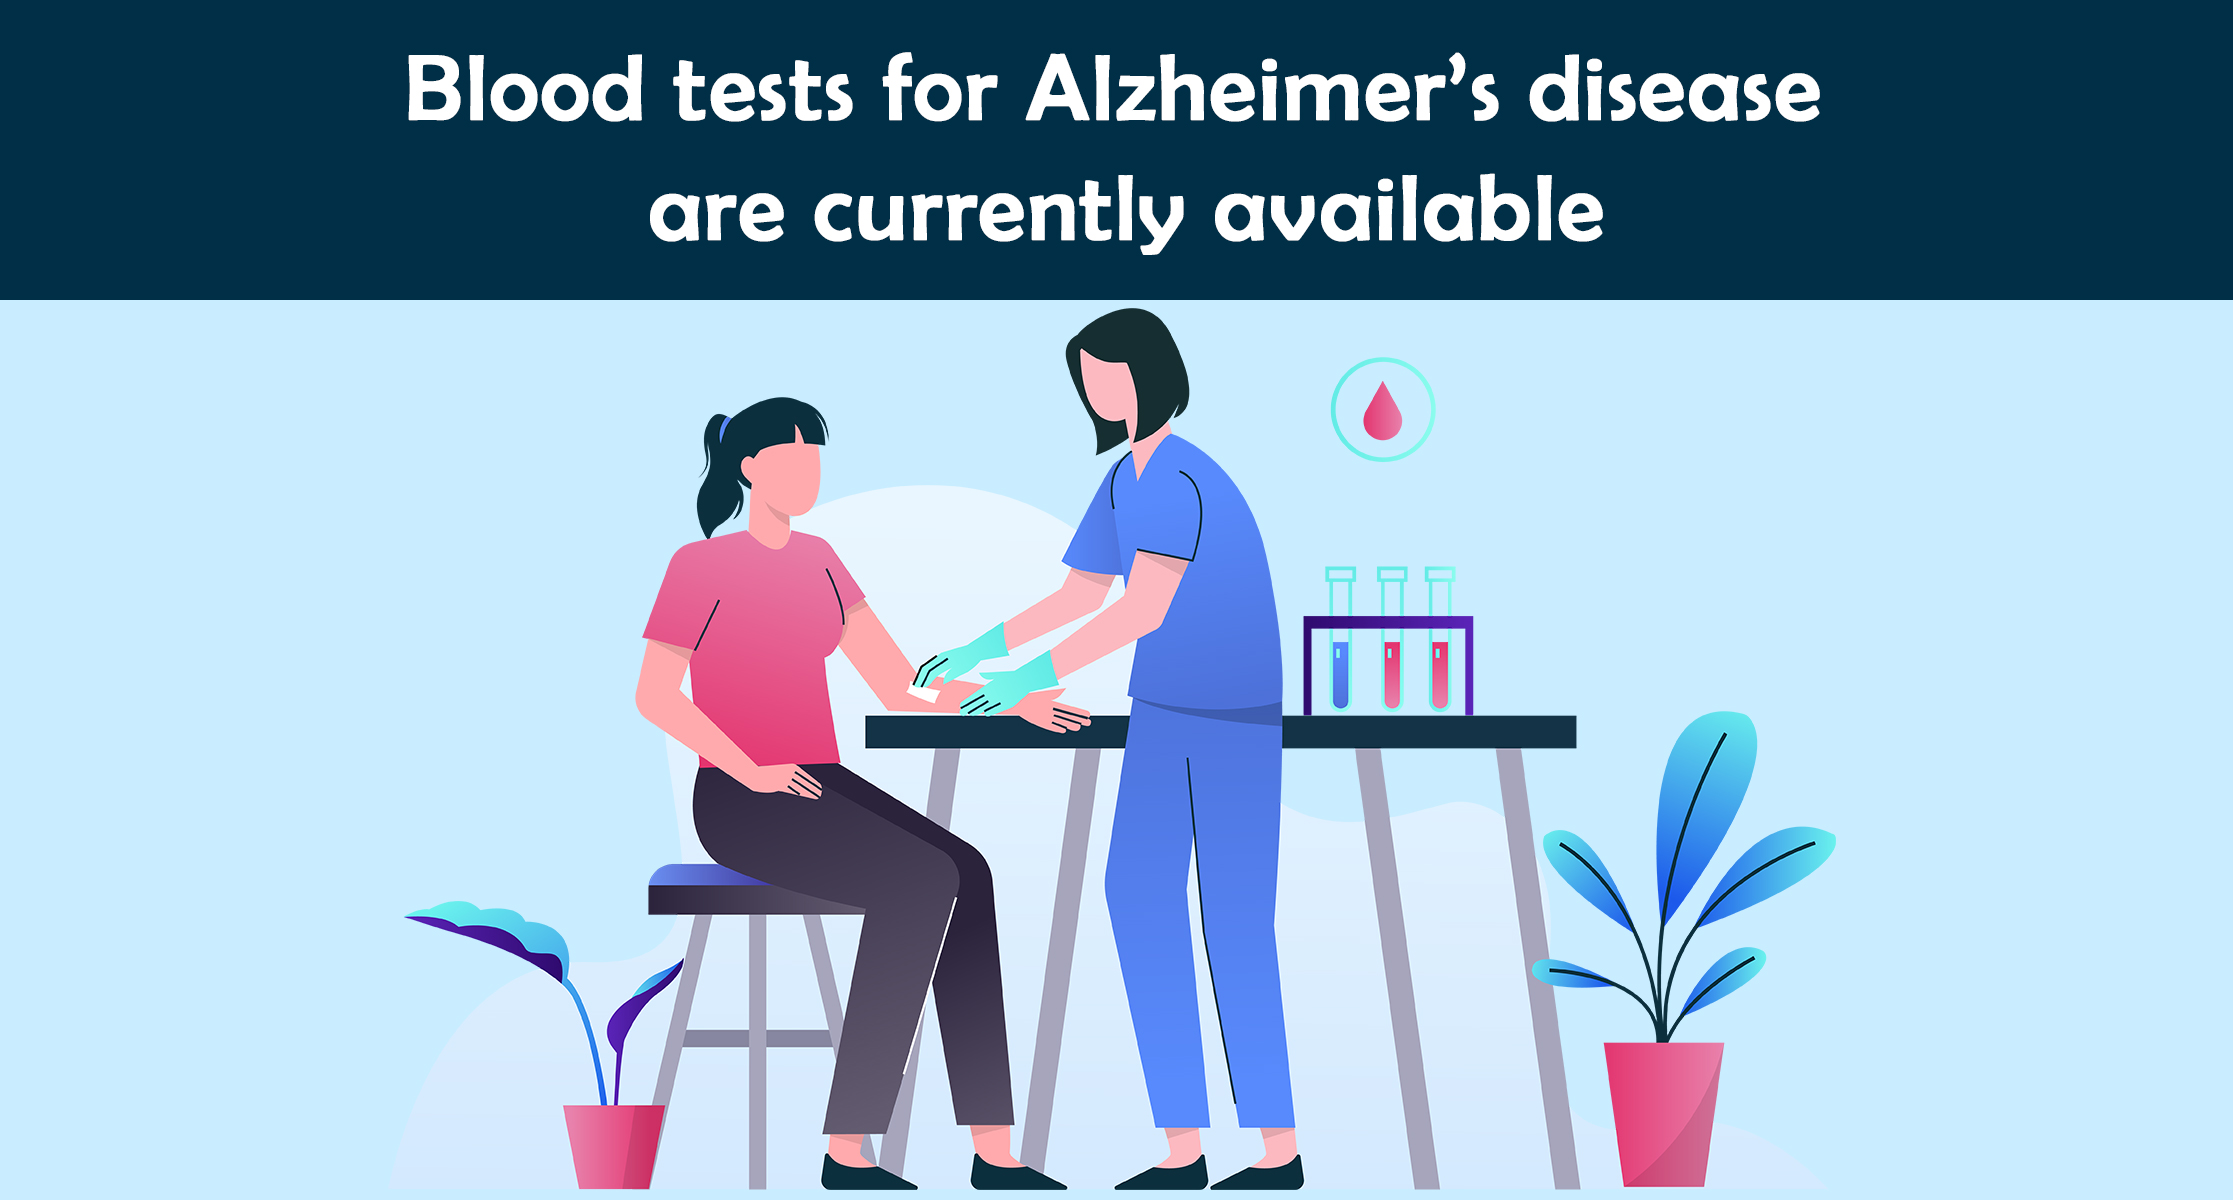 Blood tests for Alzheimer’s disease are currently available